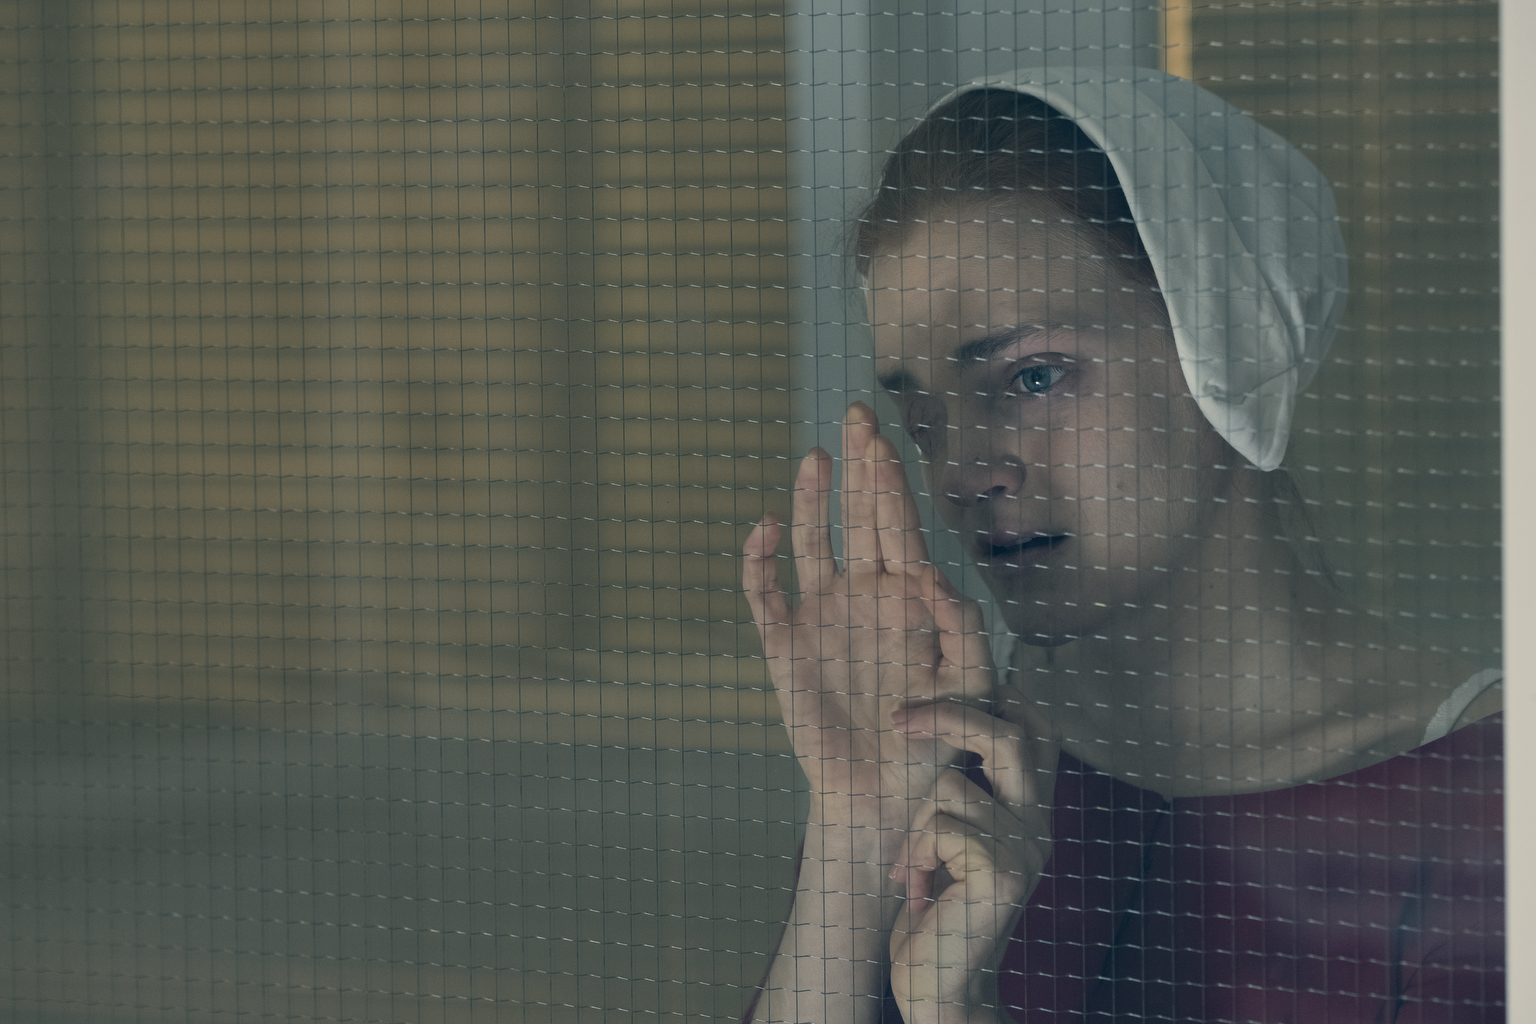 The Handmaid’s Tale May Have Just Put The First Crack In Gilead’s Ugly Facade